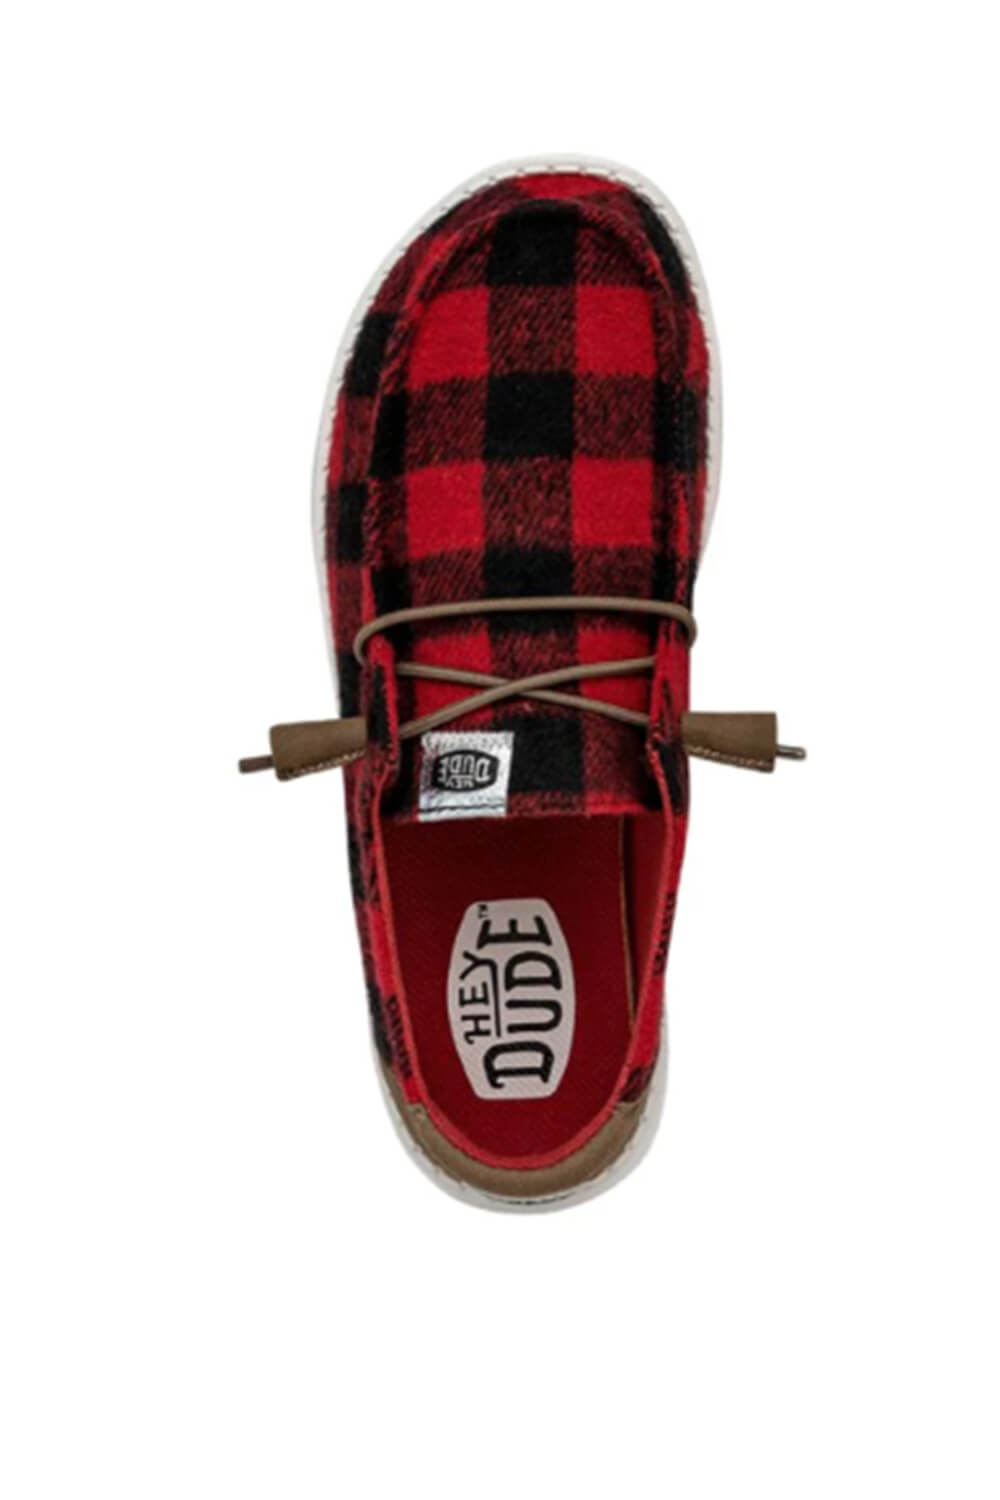 HEYDUDE Women's Wendy Buffalo Plaid Shoes in Red/Black